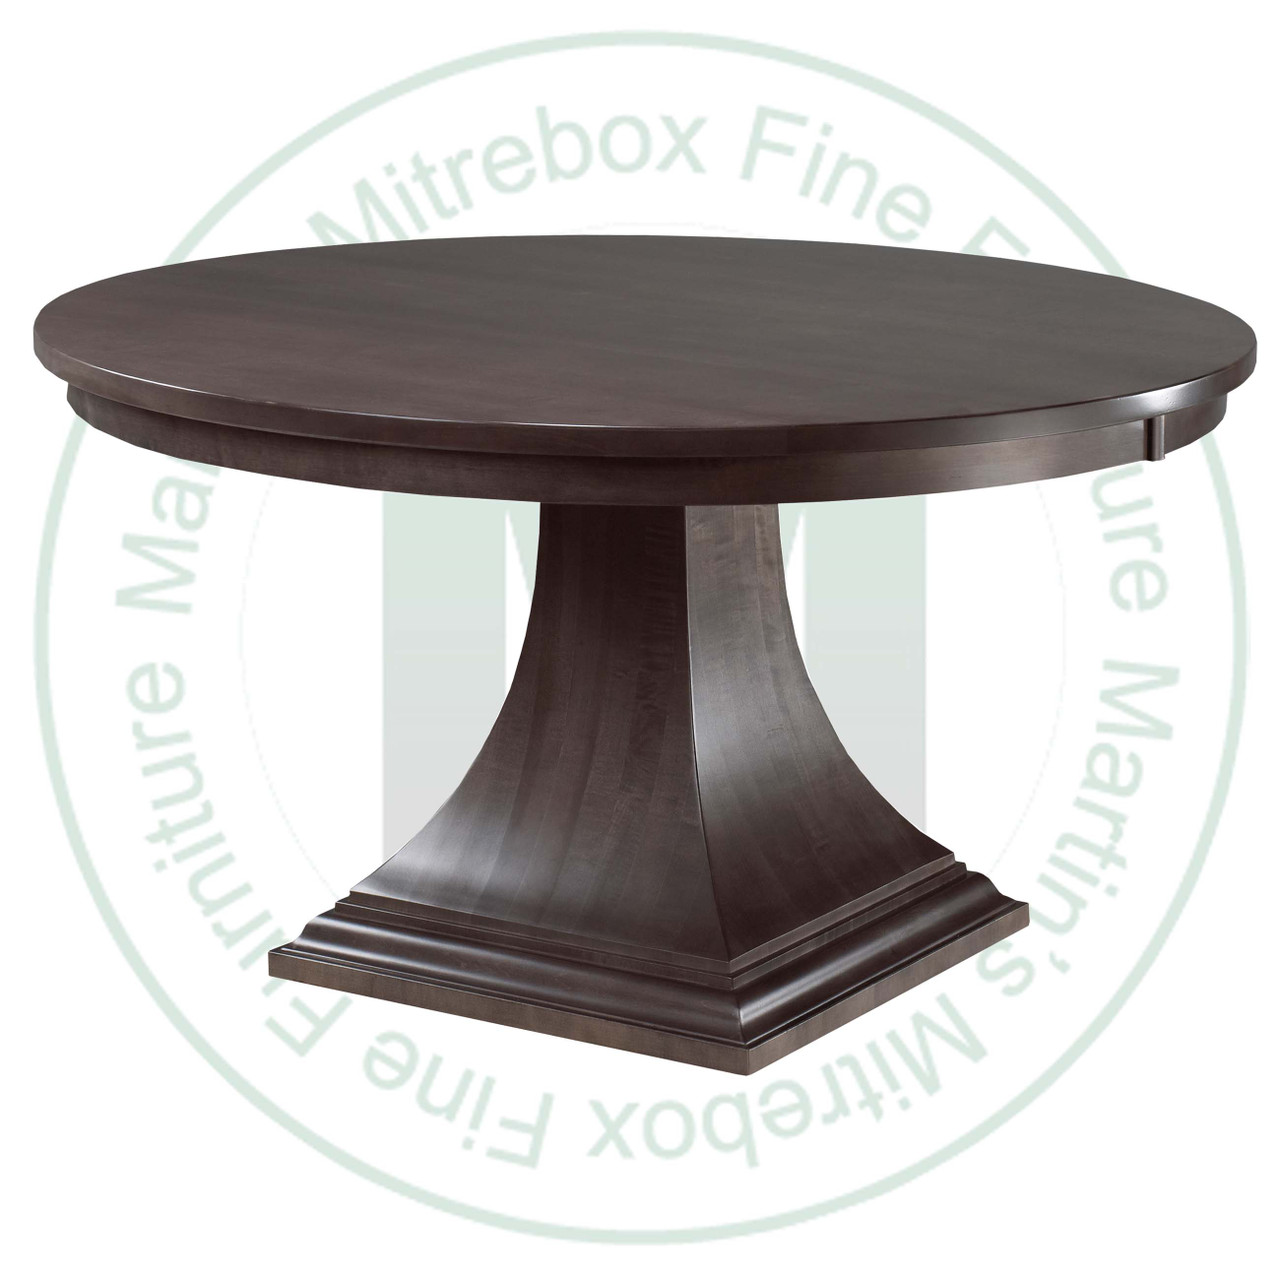 Maple Key West Single Pedestal Table 54''D x 54''W x 30''H With 2 - 12'' Leaves Table Table Has 1'' Thick Top